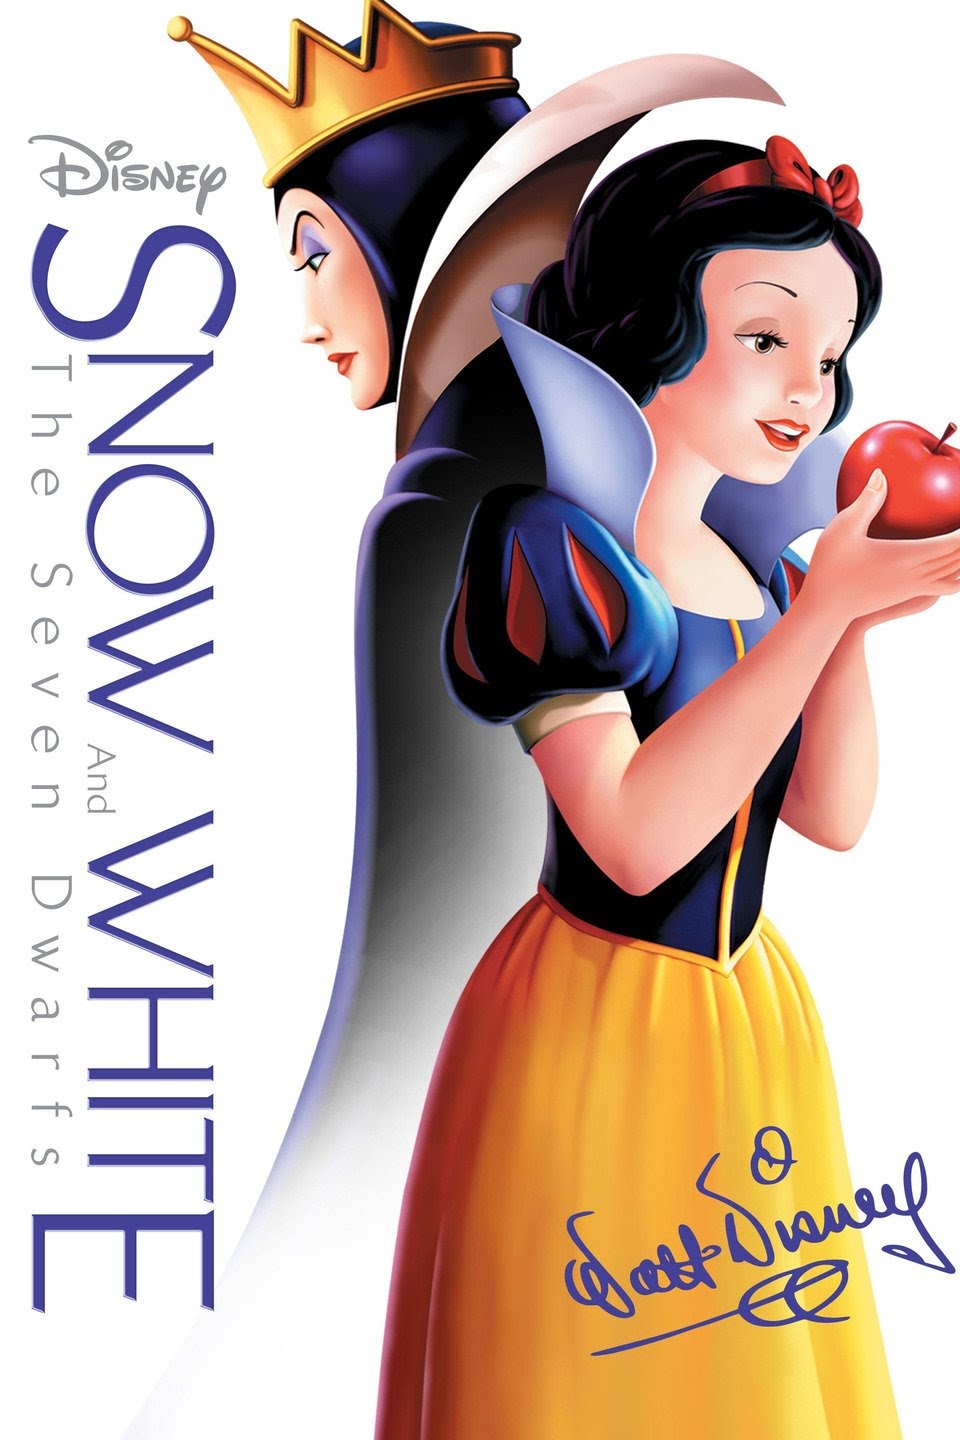 Snow White And The Seven Dwarfs (1938) Vudu or Movies Anywhere HD redemption only